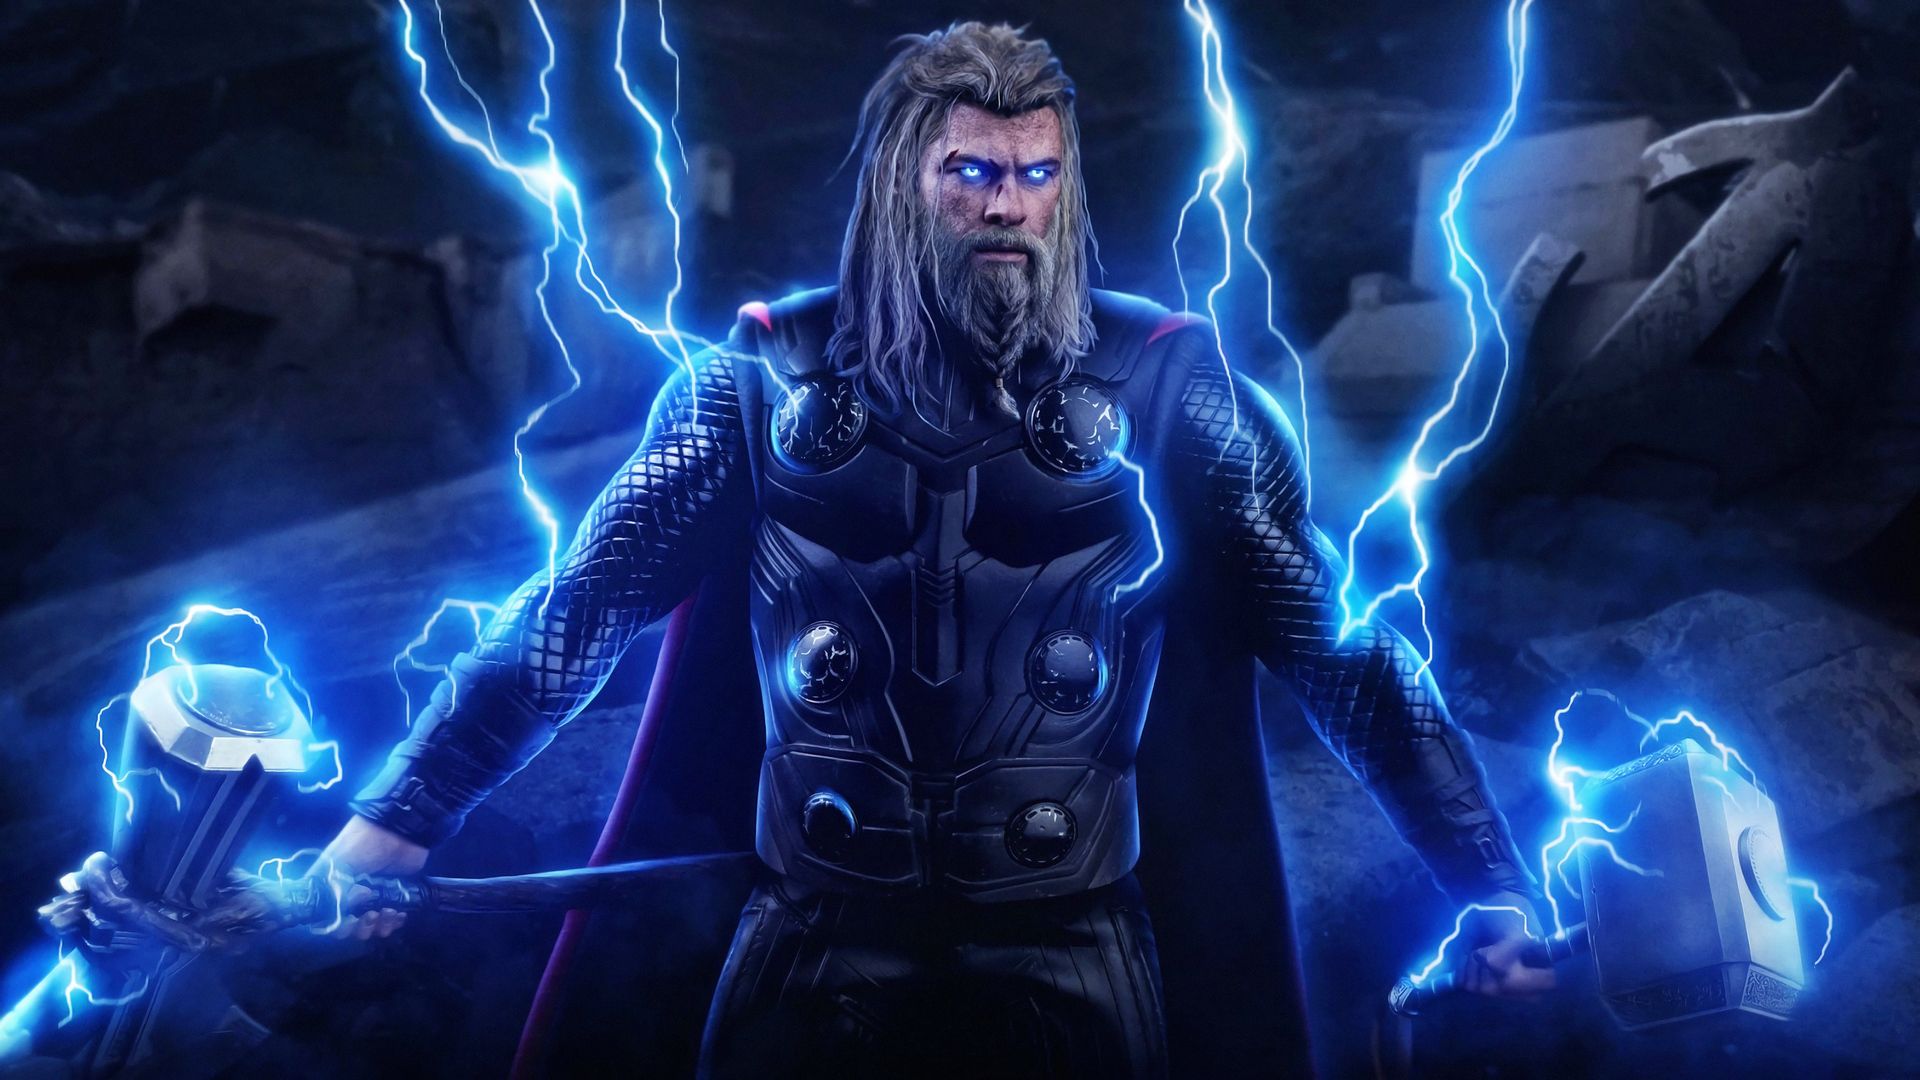 Wield the power of Love and Thunder with our Thor themed wallpapers